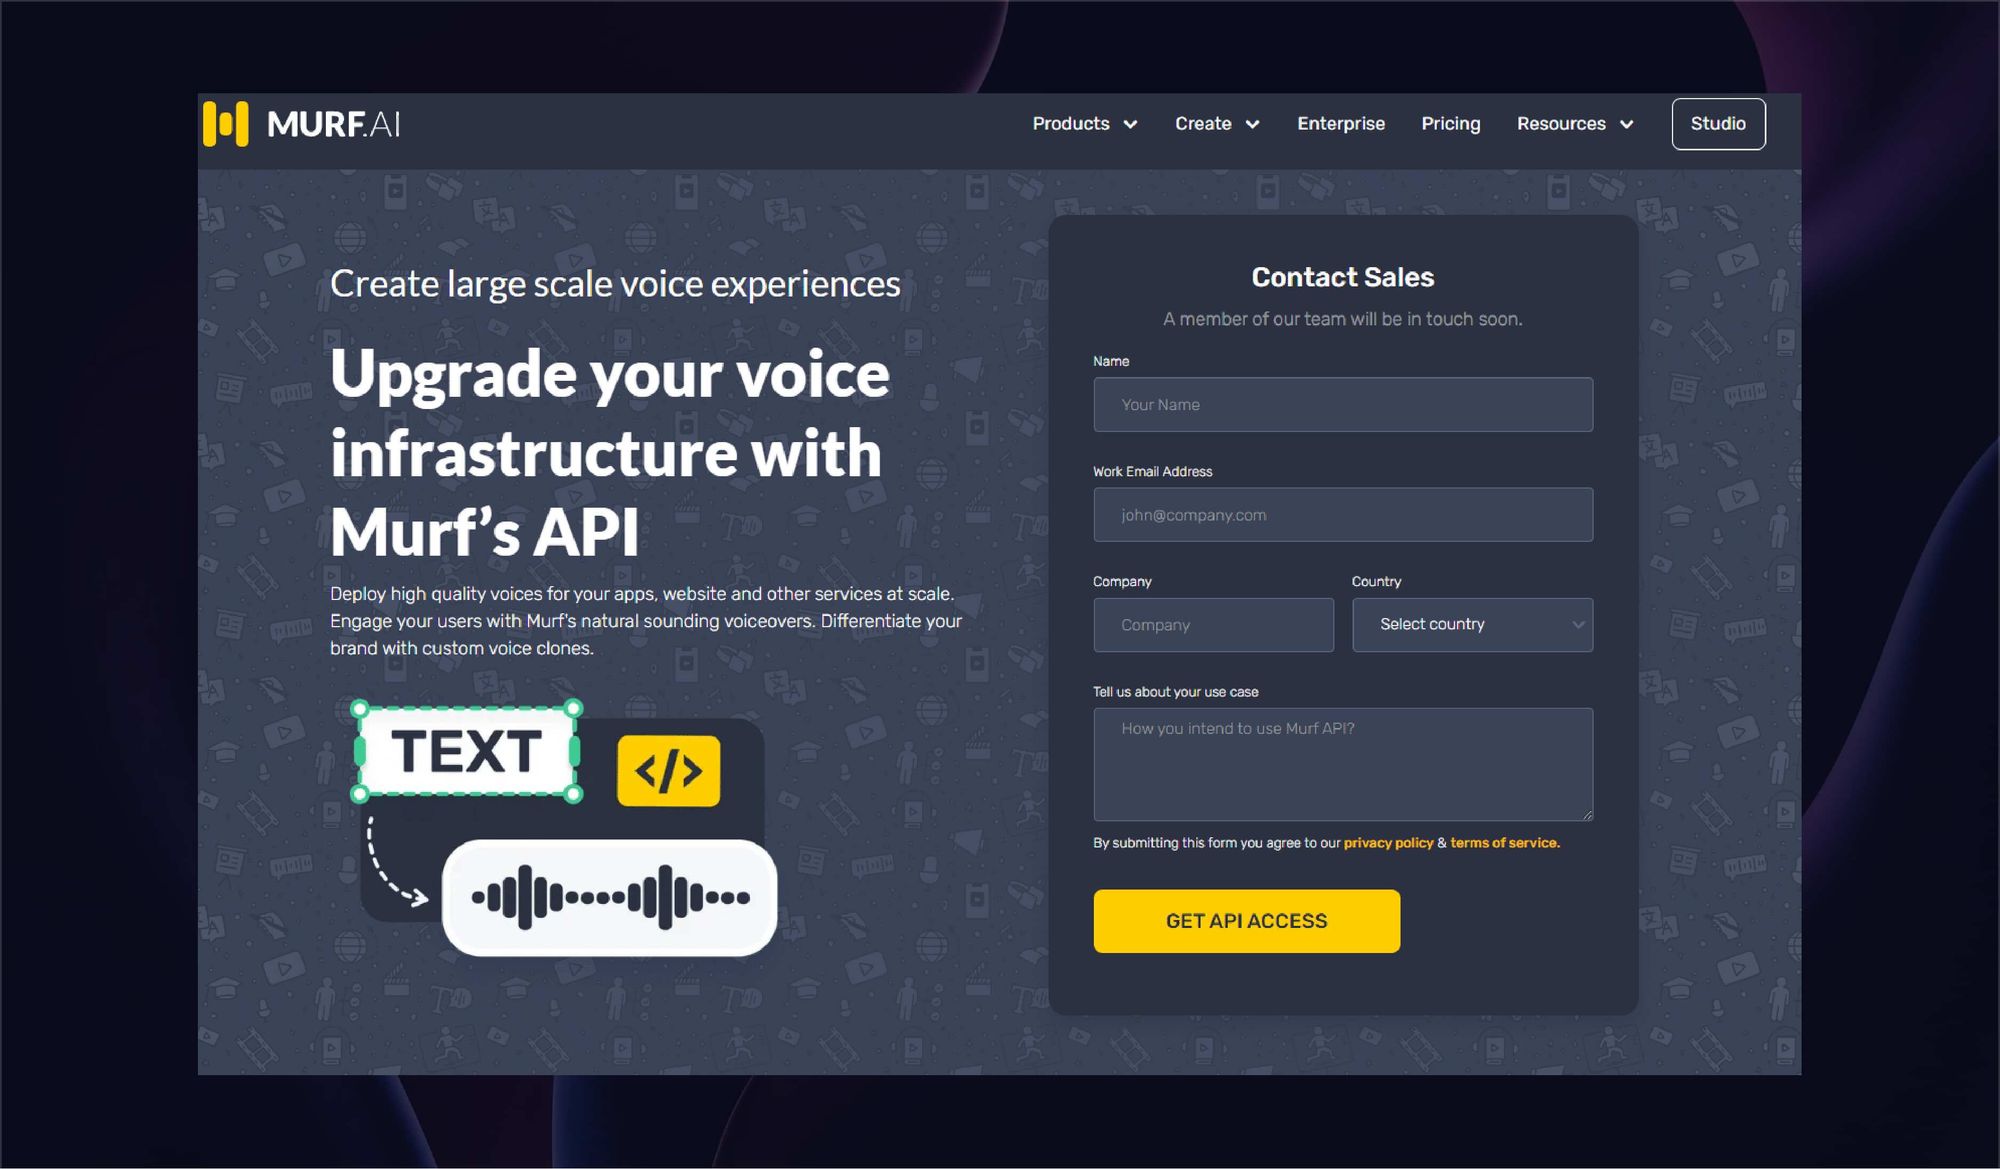 Murf ai offers upgrade voice with Murf's API